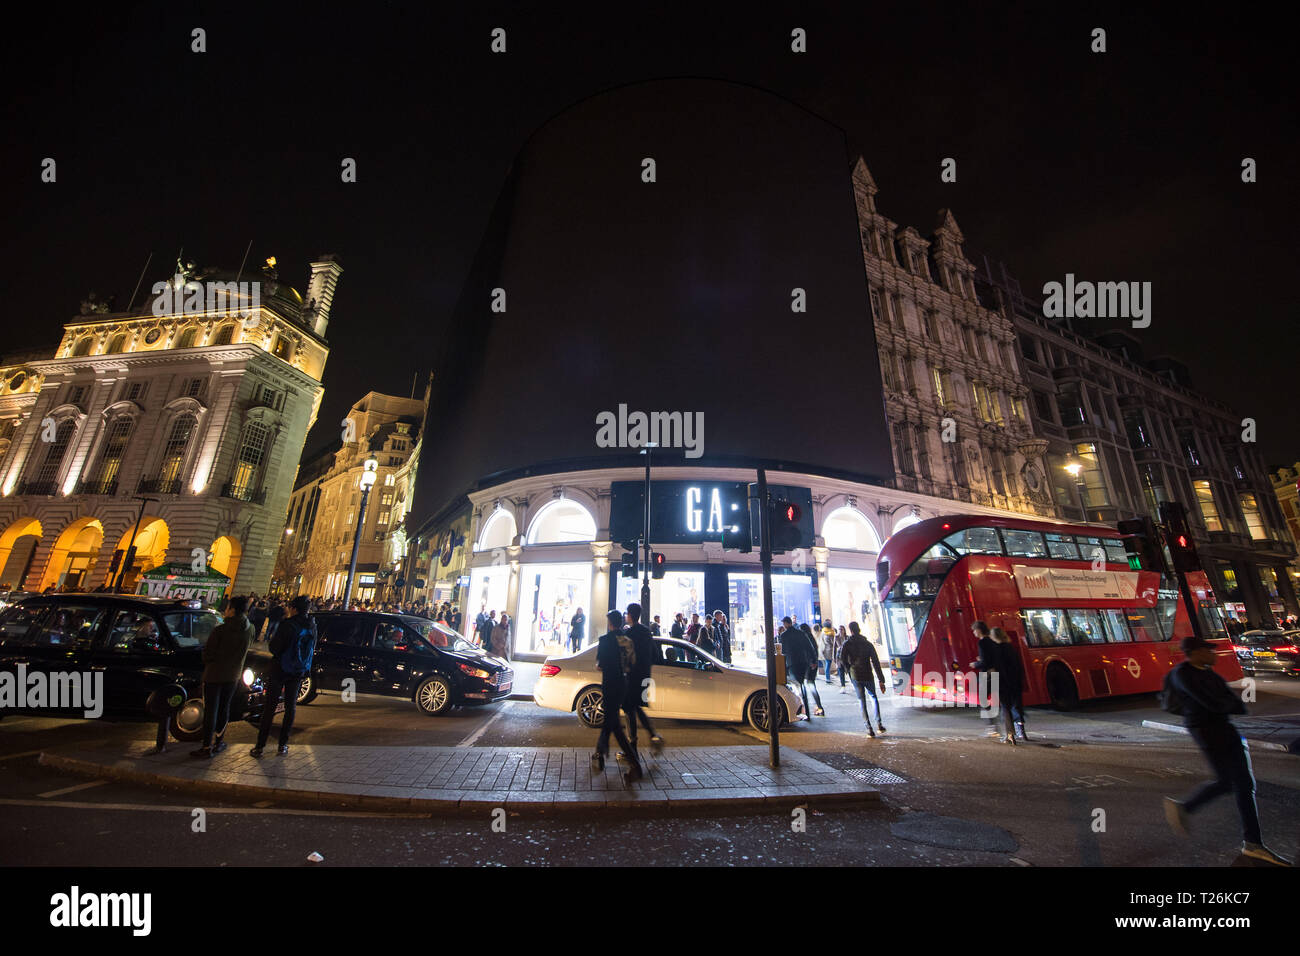 General view of Piccadilly Circus, in central London, during Earth Hour 2019, which sees buildings and landmarks in cities around the world turn off their lights for one hour, raising awareness and money for climate and nature initiatives around the world. Stock Photo